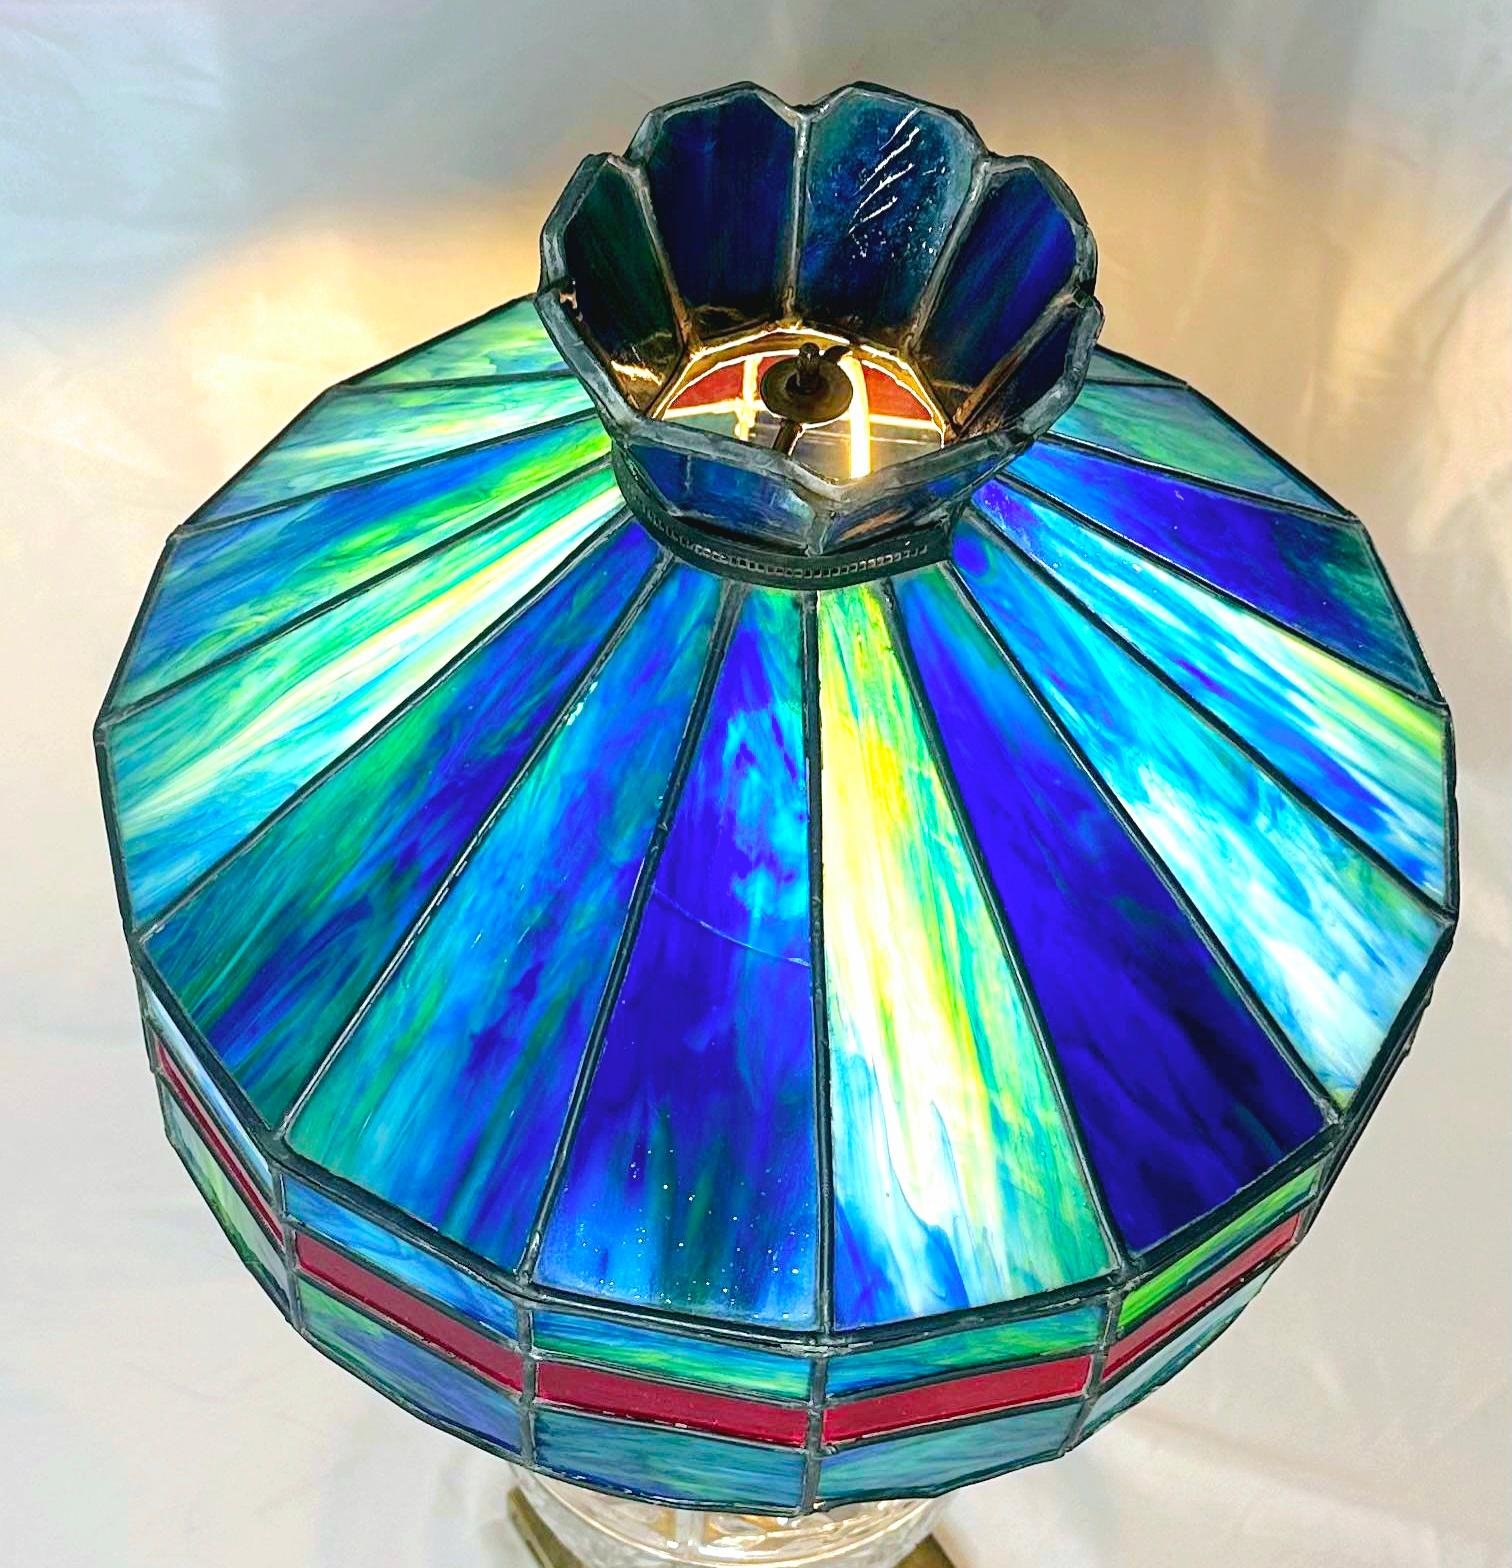 This is just the shade.
Could be used for a table or floor lamp.
A pendant or chandelier. 
Gorgeous blue slag glass.
Ranges from sea foam to turquoise to royal blue.
Shocking red stripe only appears when light is behind the shade.
This piece is a